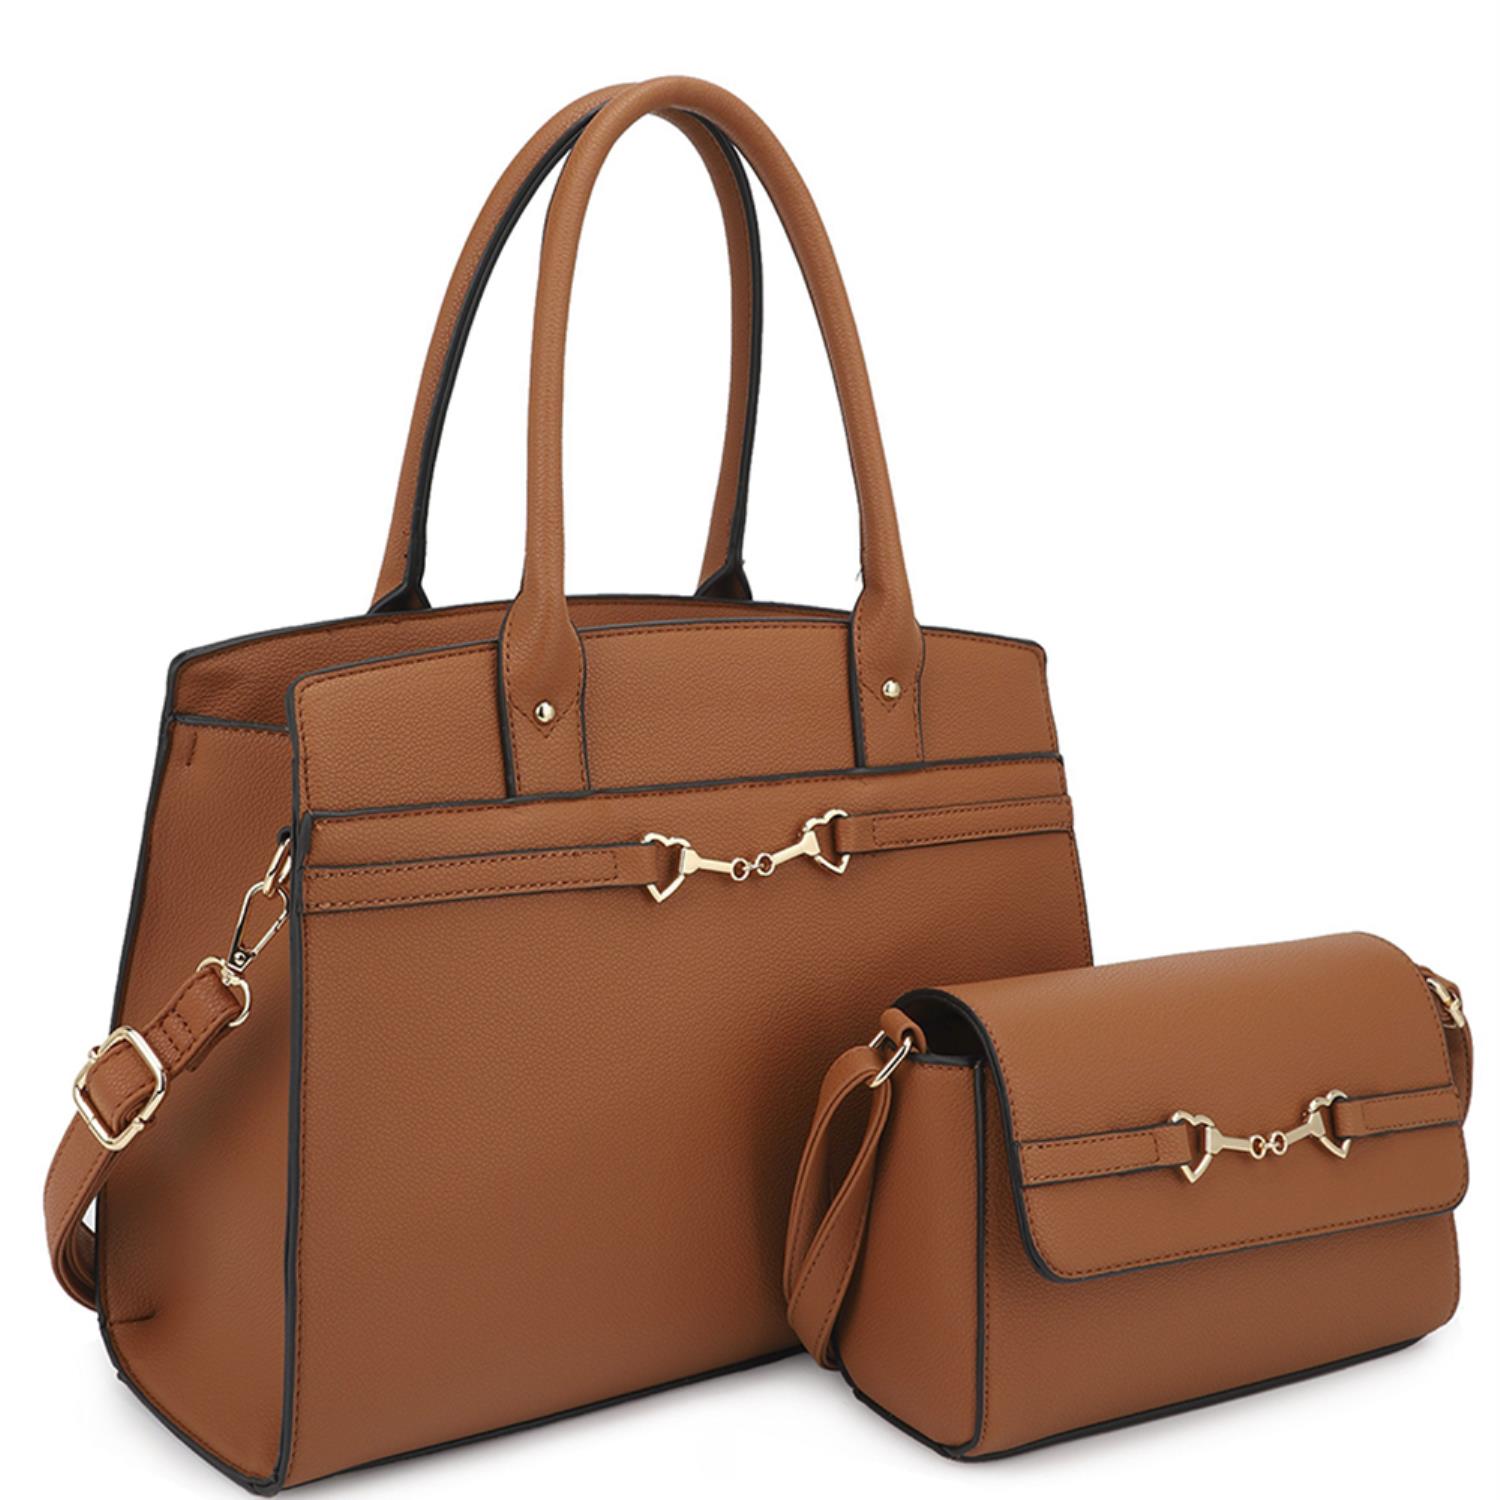 Brown 2in1 Matching Design Handle Satchel With Crossbody Bag - 5 colors - handbag at TFC&H Co.